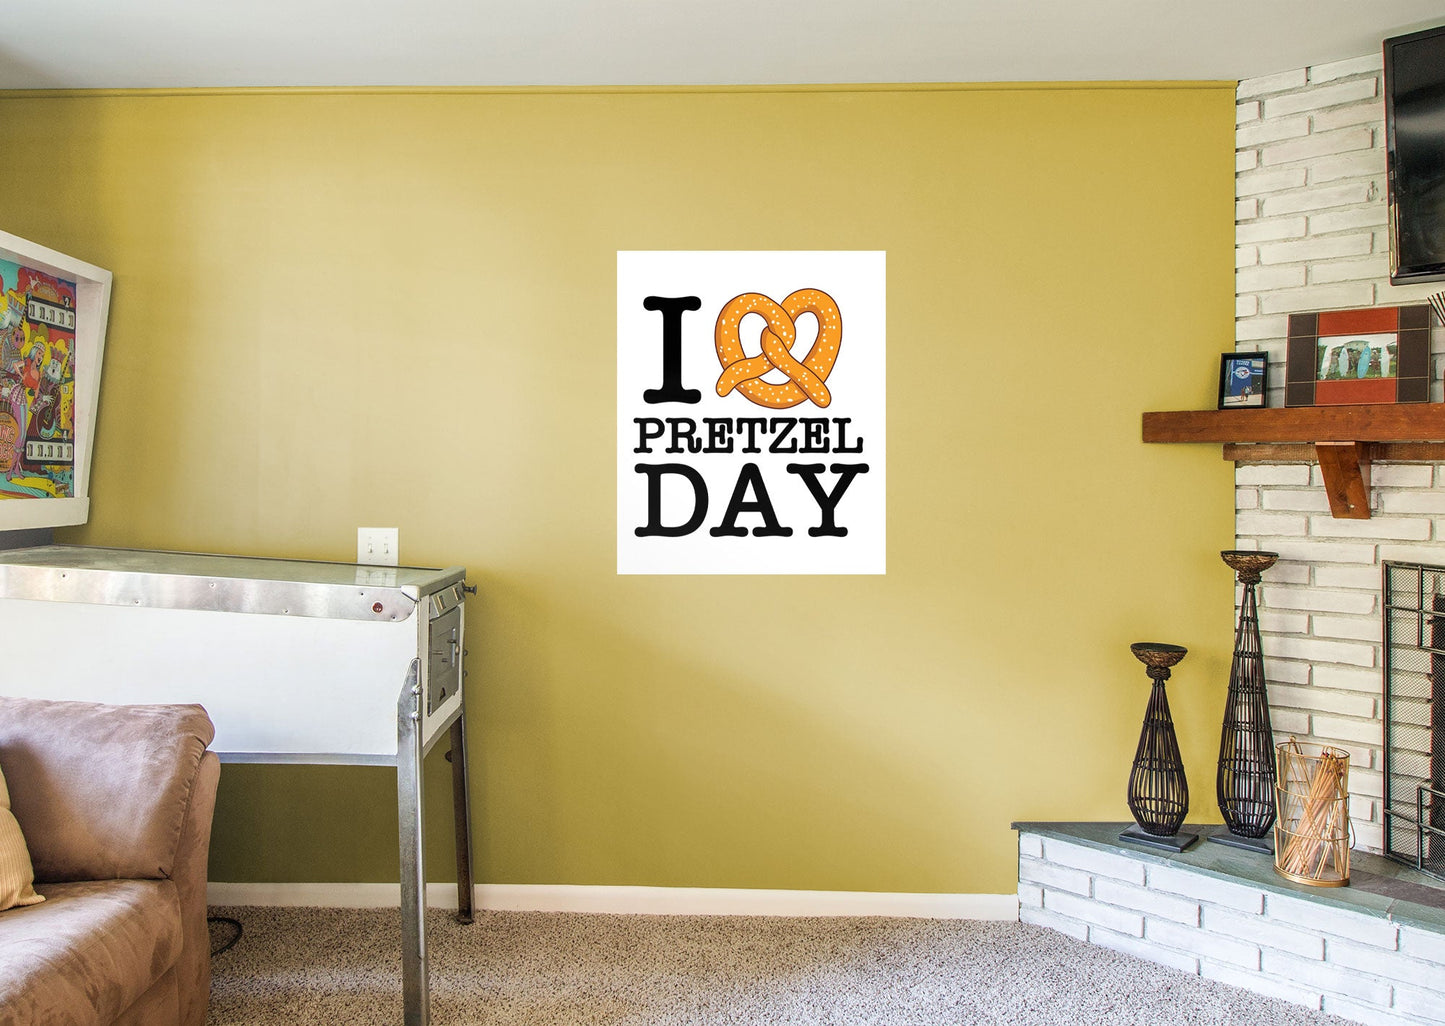 The Office:  Pretzel Day Mural        - Officially Licensed NBC Universal Removable Wall   Adhesive Decal